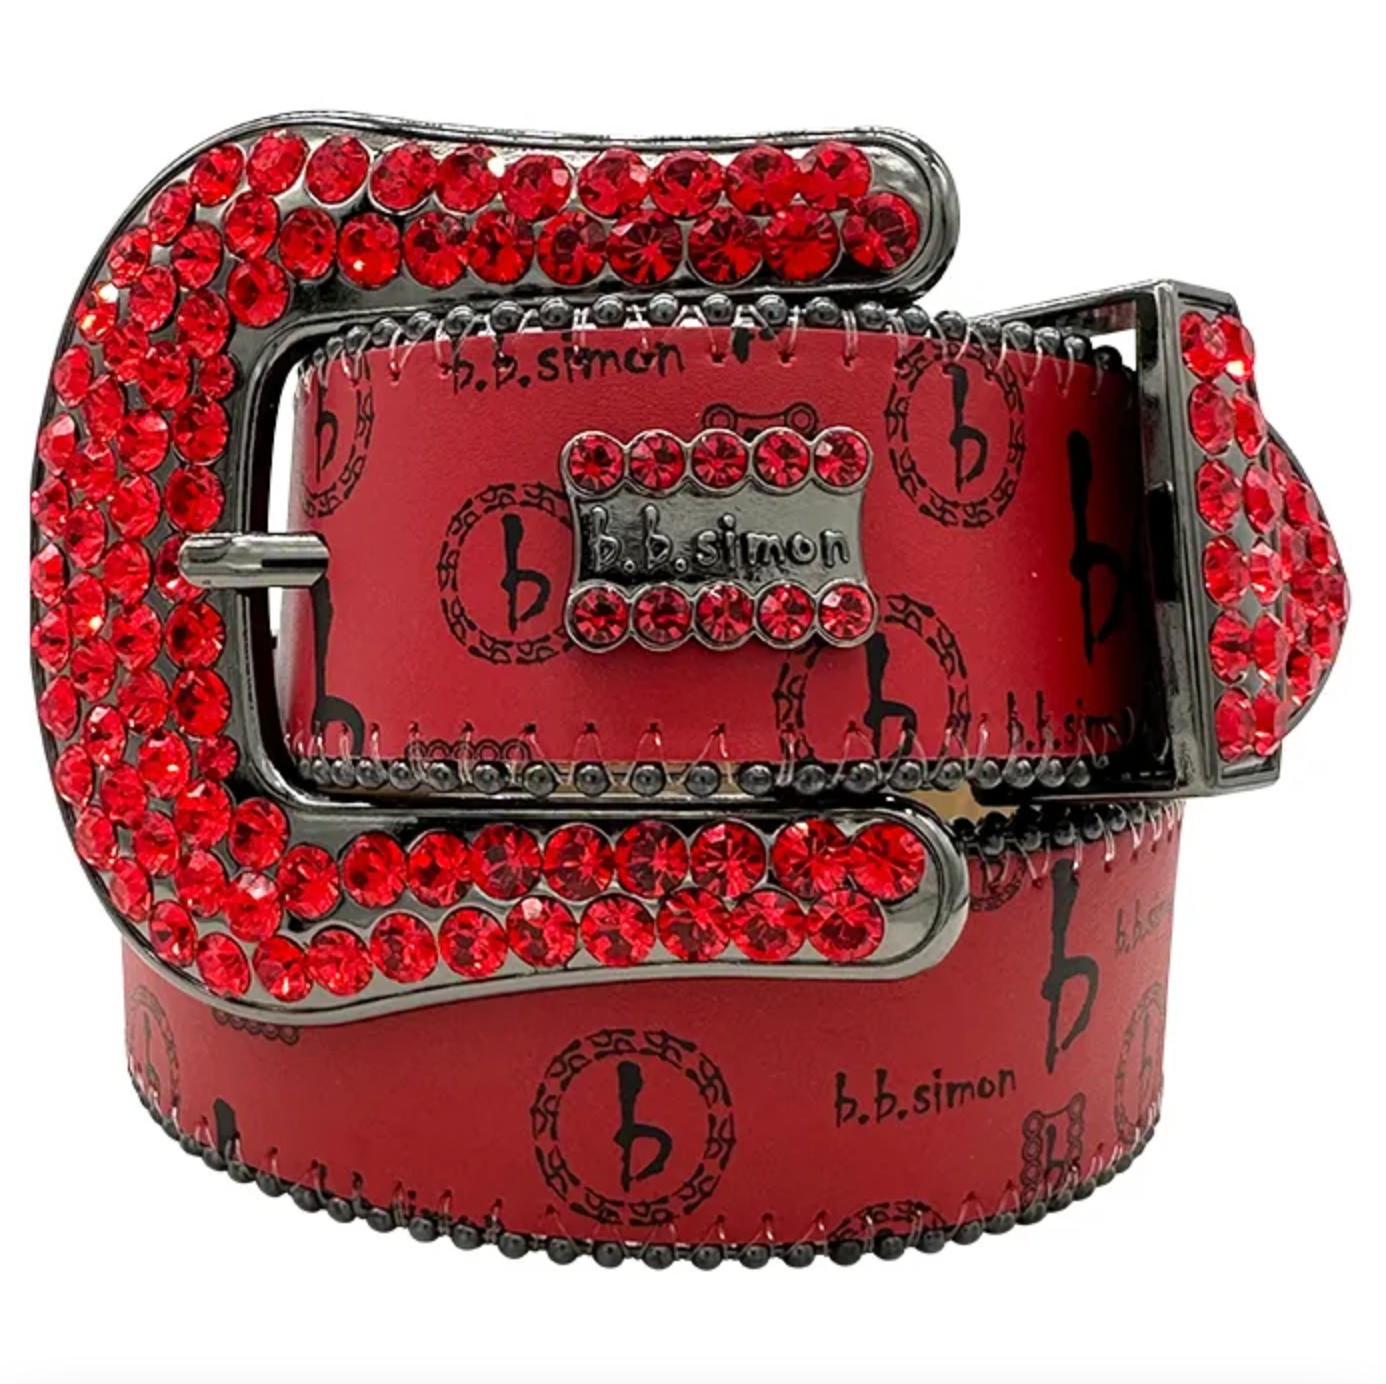 BB Simon belt men on sale with free shipping